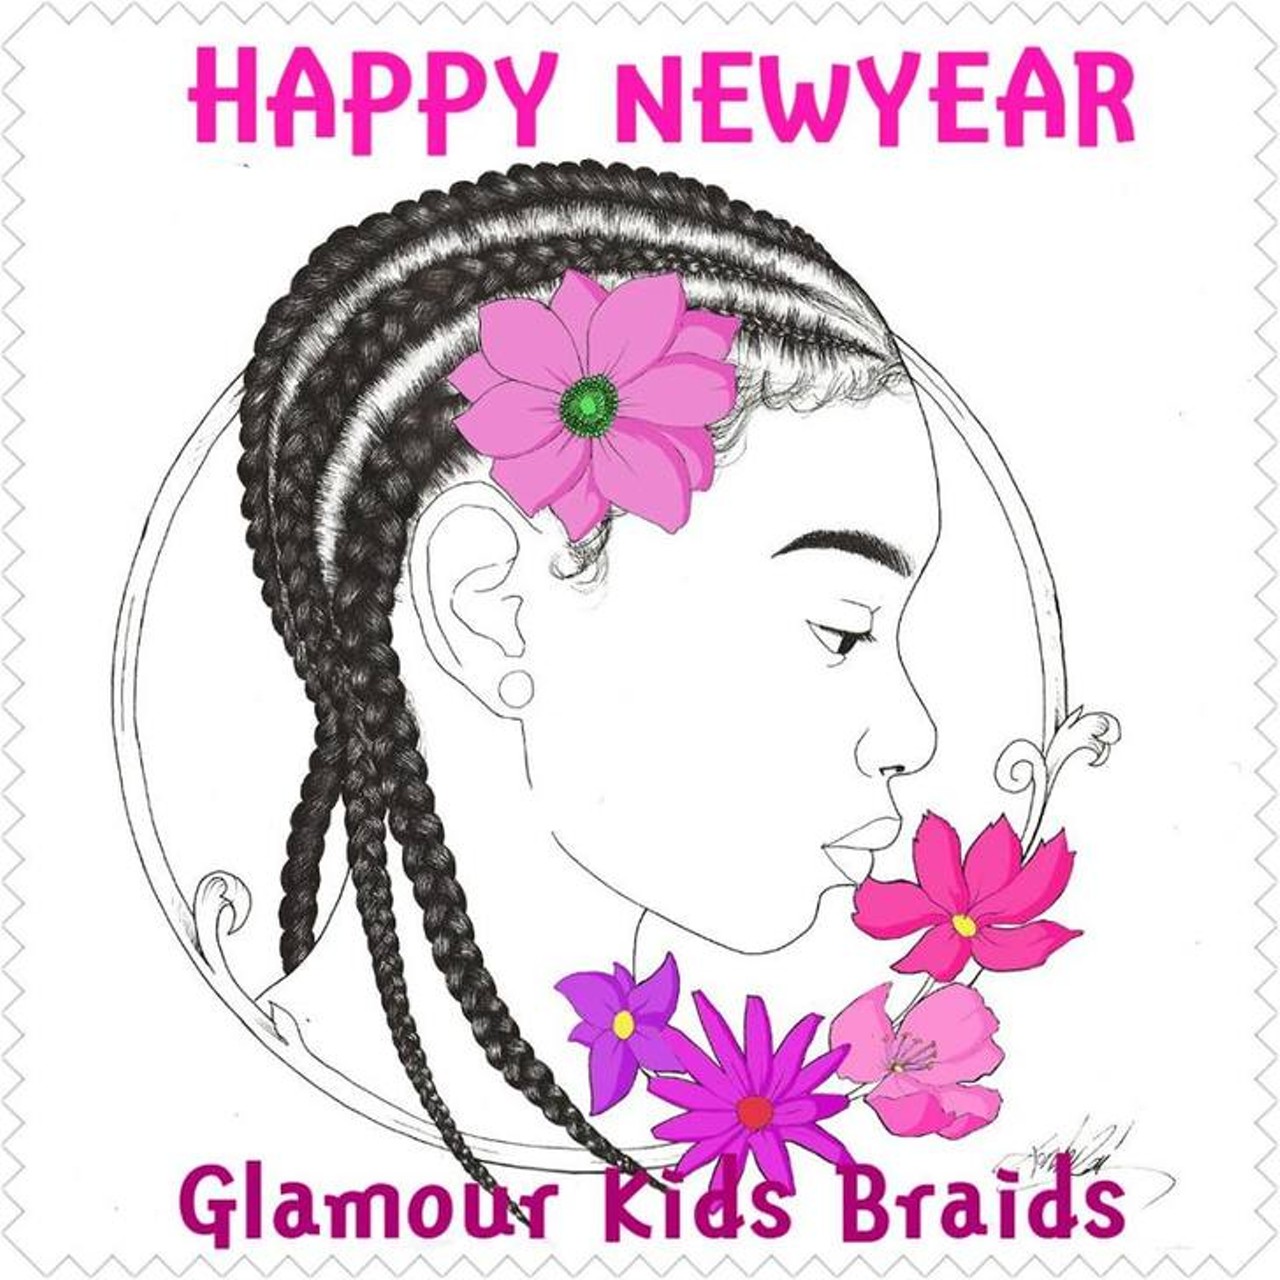 Glamour Kids Braids
Children age 3 and up can receive an assortment of different hair braiding services along with spa-themed parties for girls age 2 to 17.
Follow on: Facebook, YouTube
Photo via Glamour Kids/Facebook